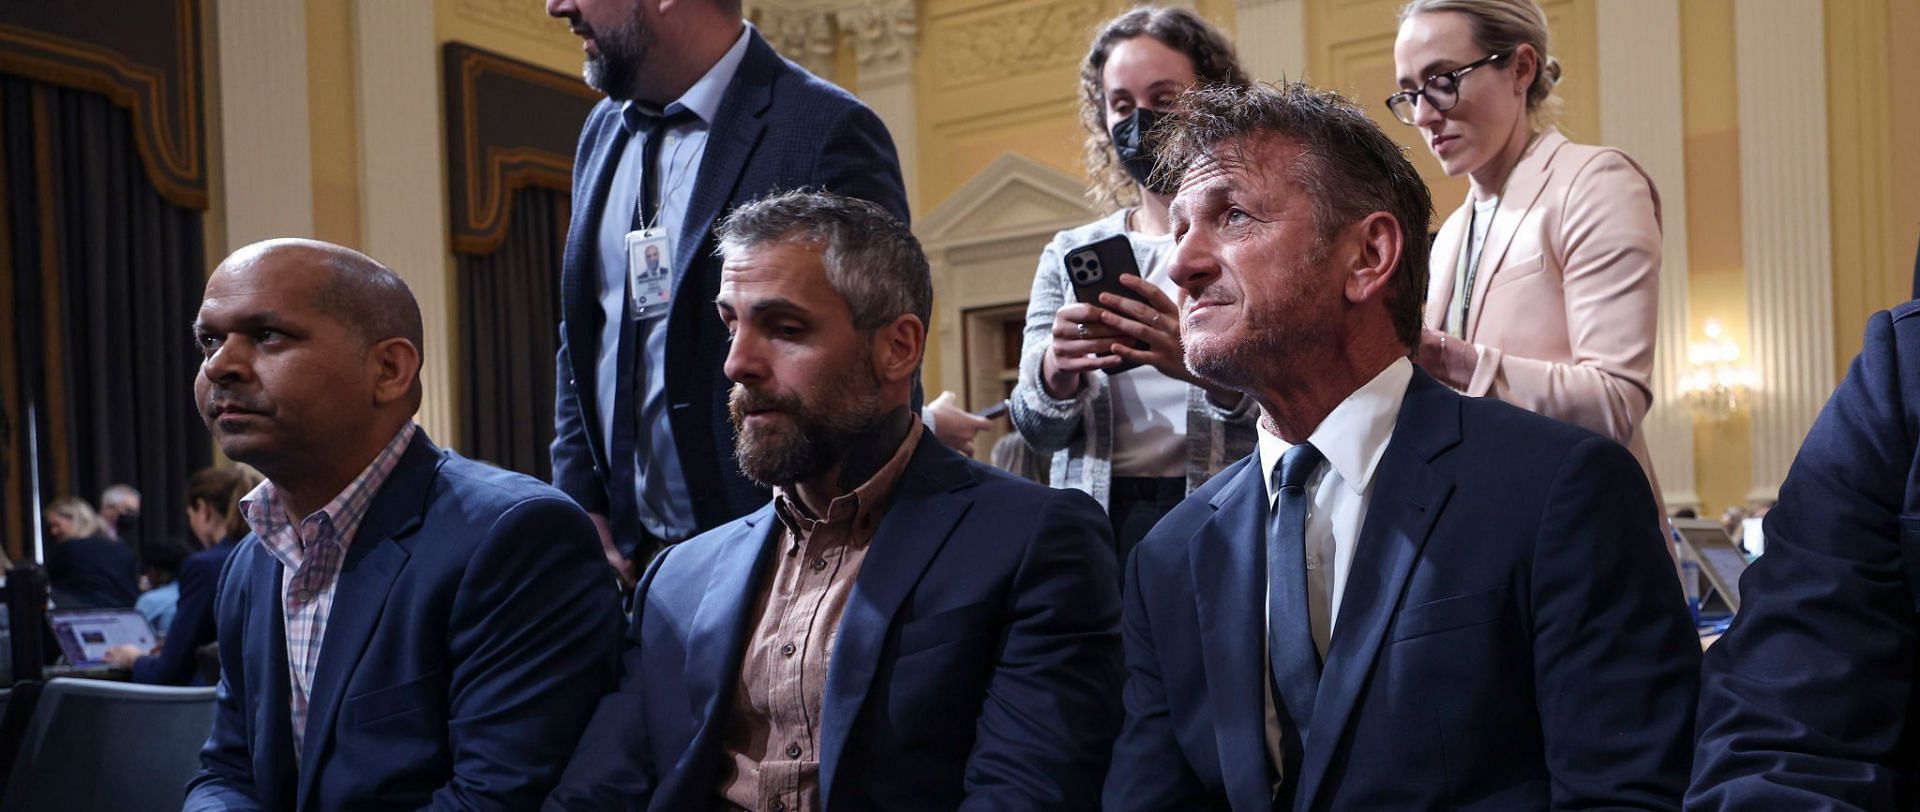 Sean Penn revealed he attended Jan 6 hearing as a &quot;citizen&quot; (Image via Getty Images)